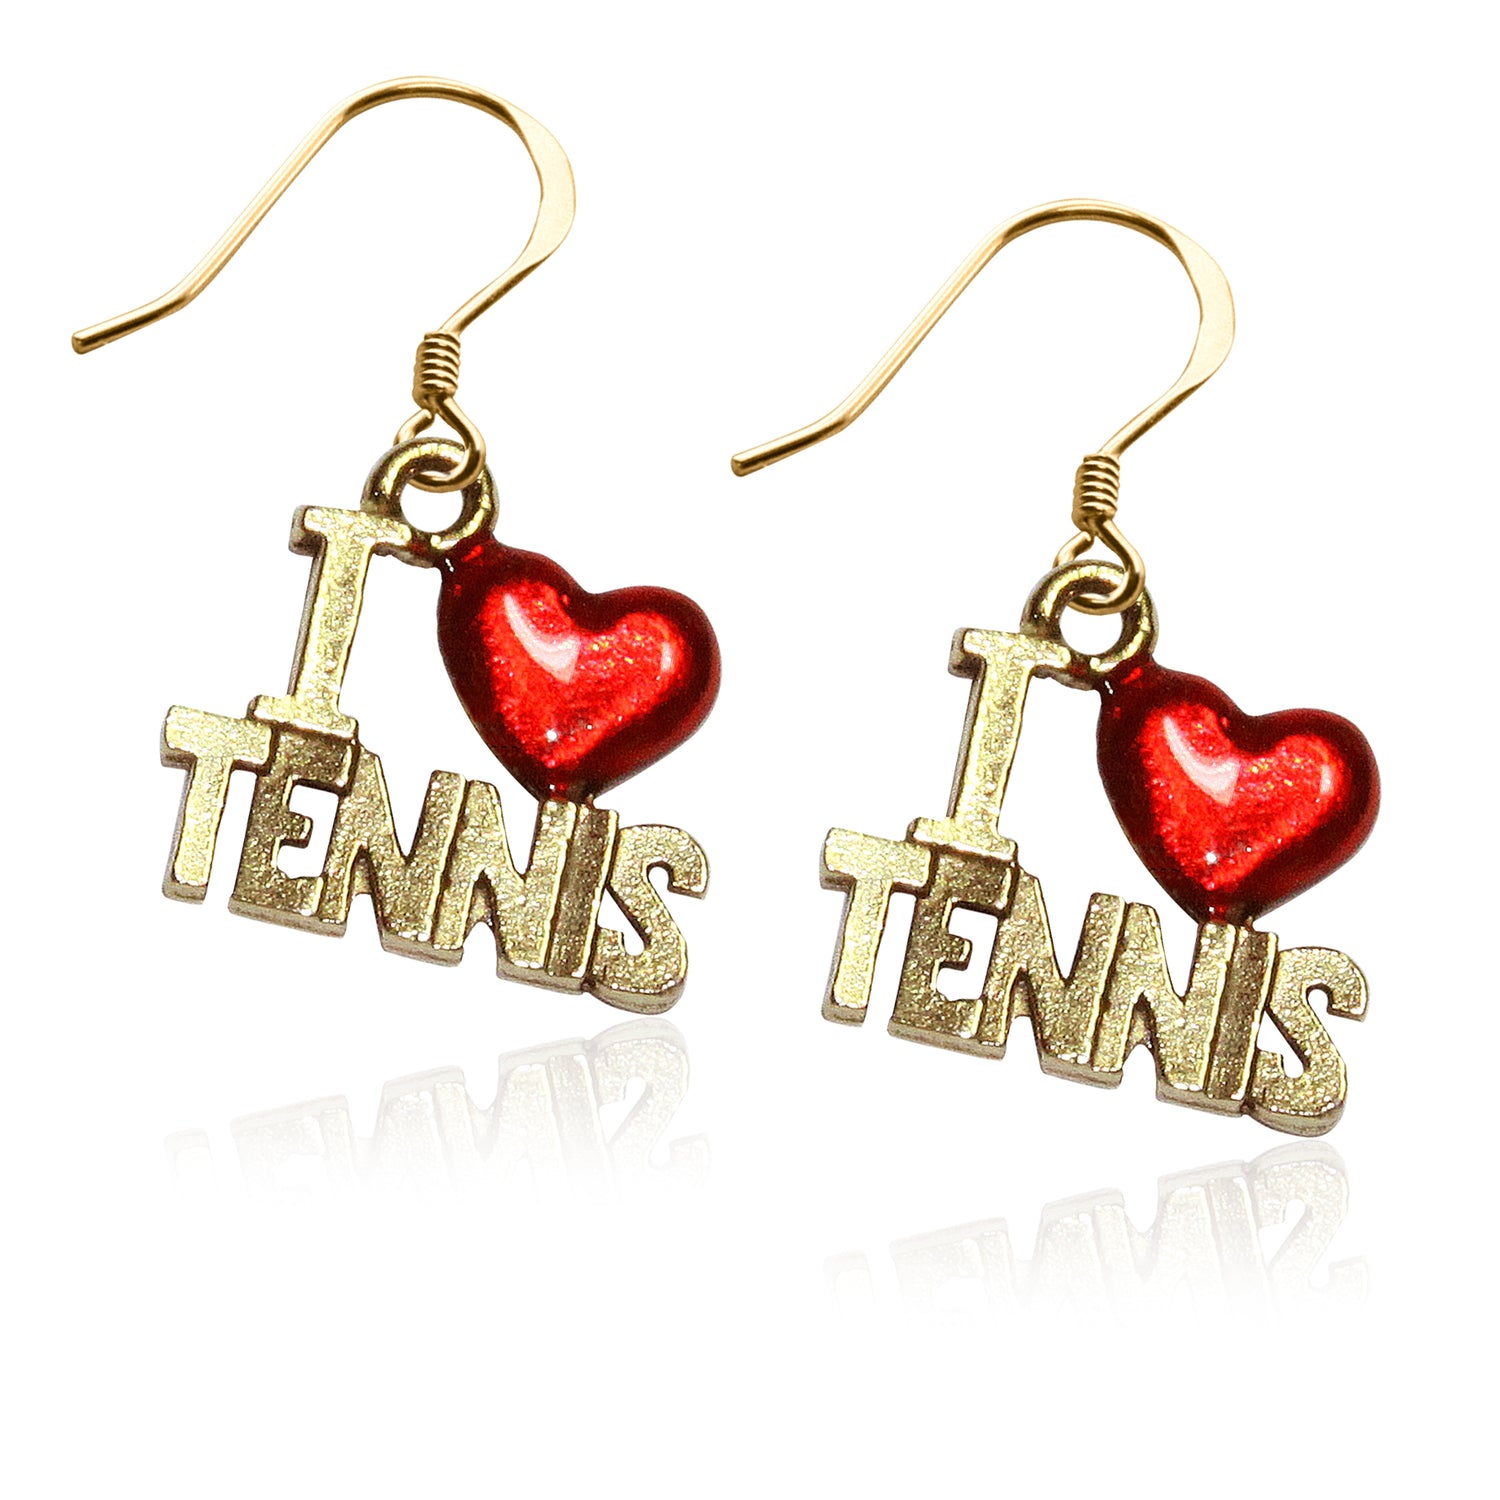 Whimsical Gifts | I Love Tennis Charm Earrings in Gold Finish | Hobbies & Special Interests | Sports | Jewelry